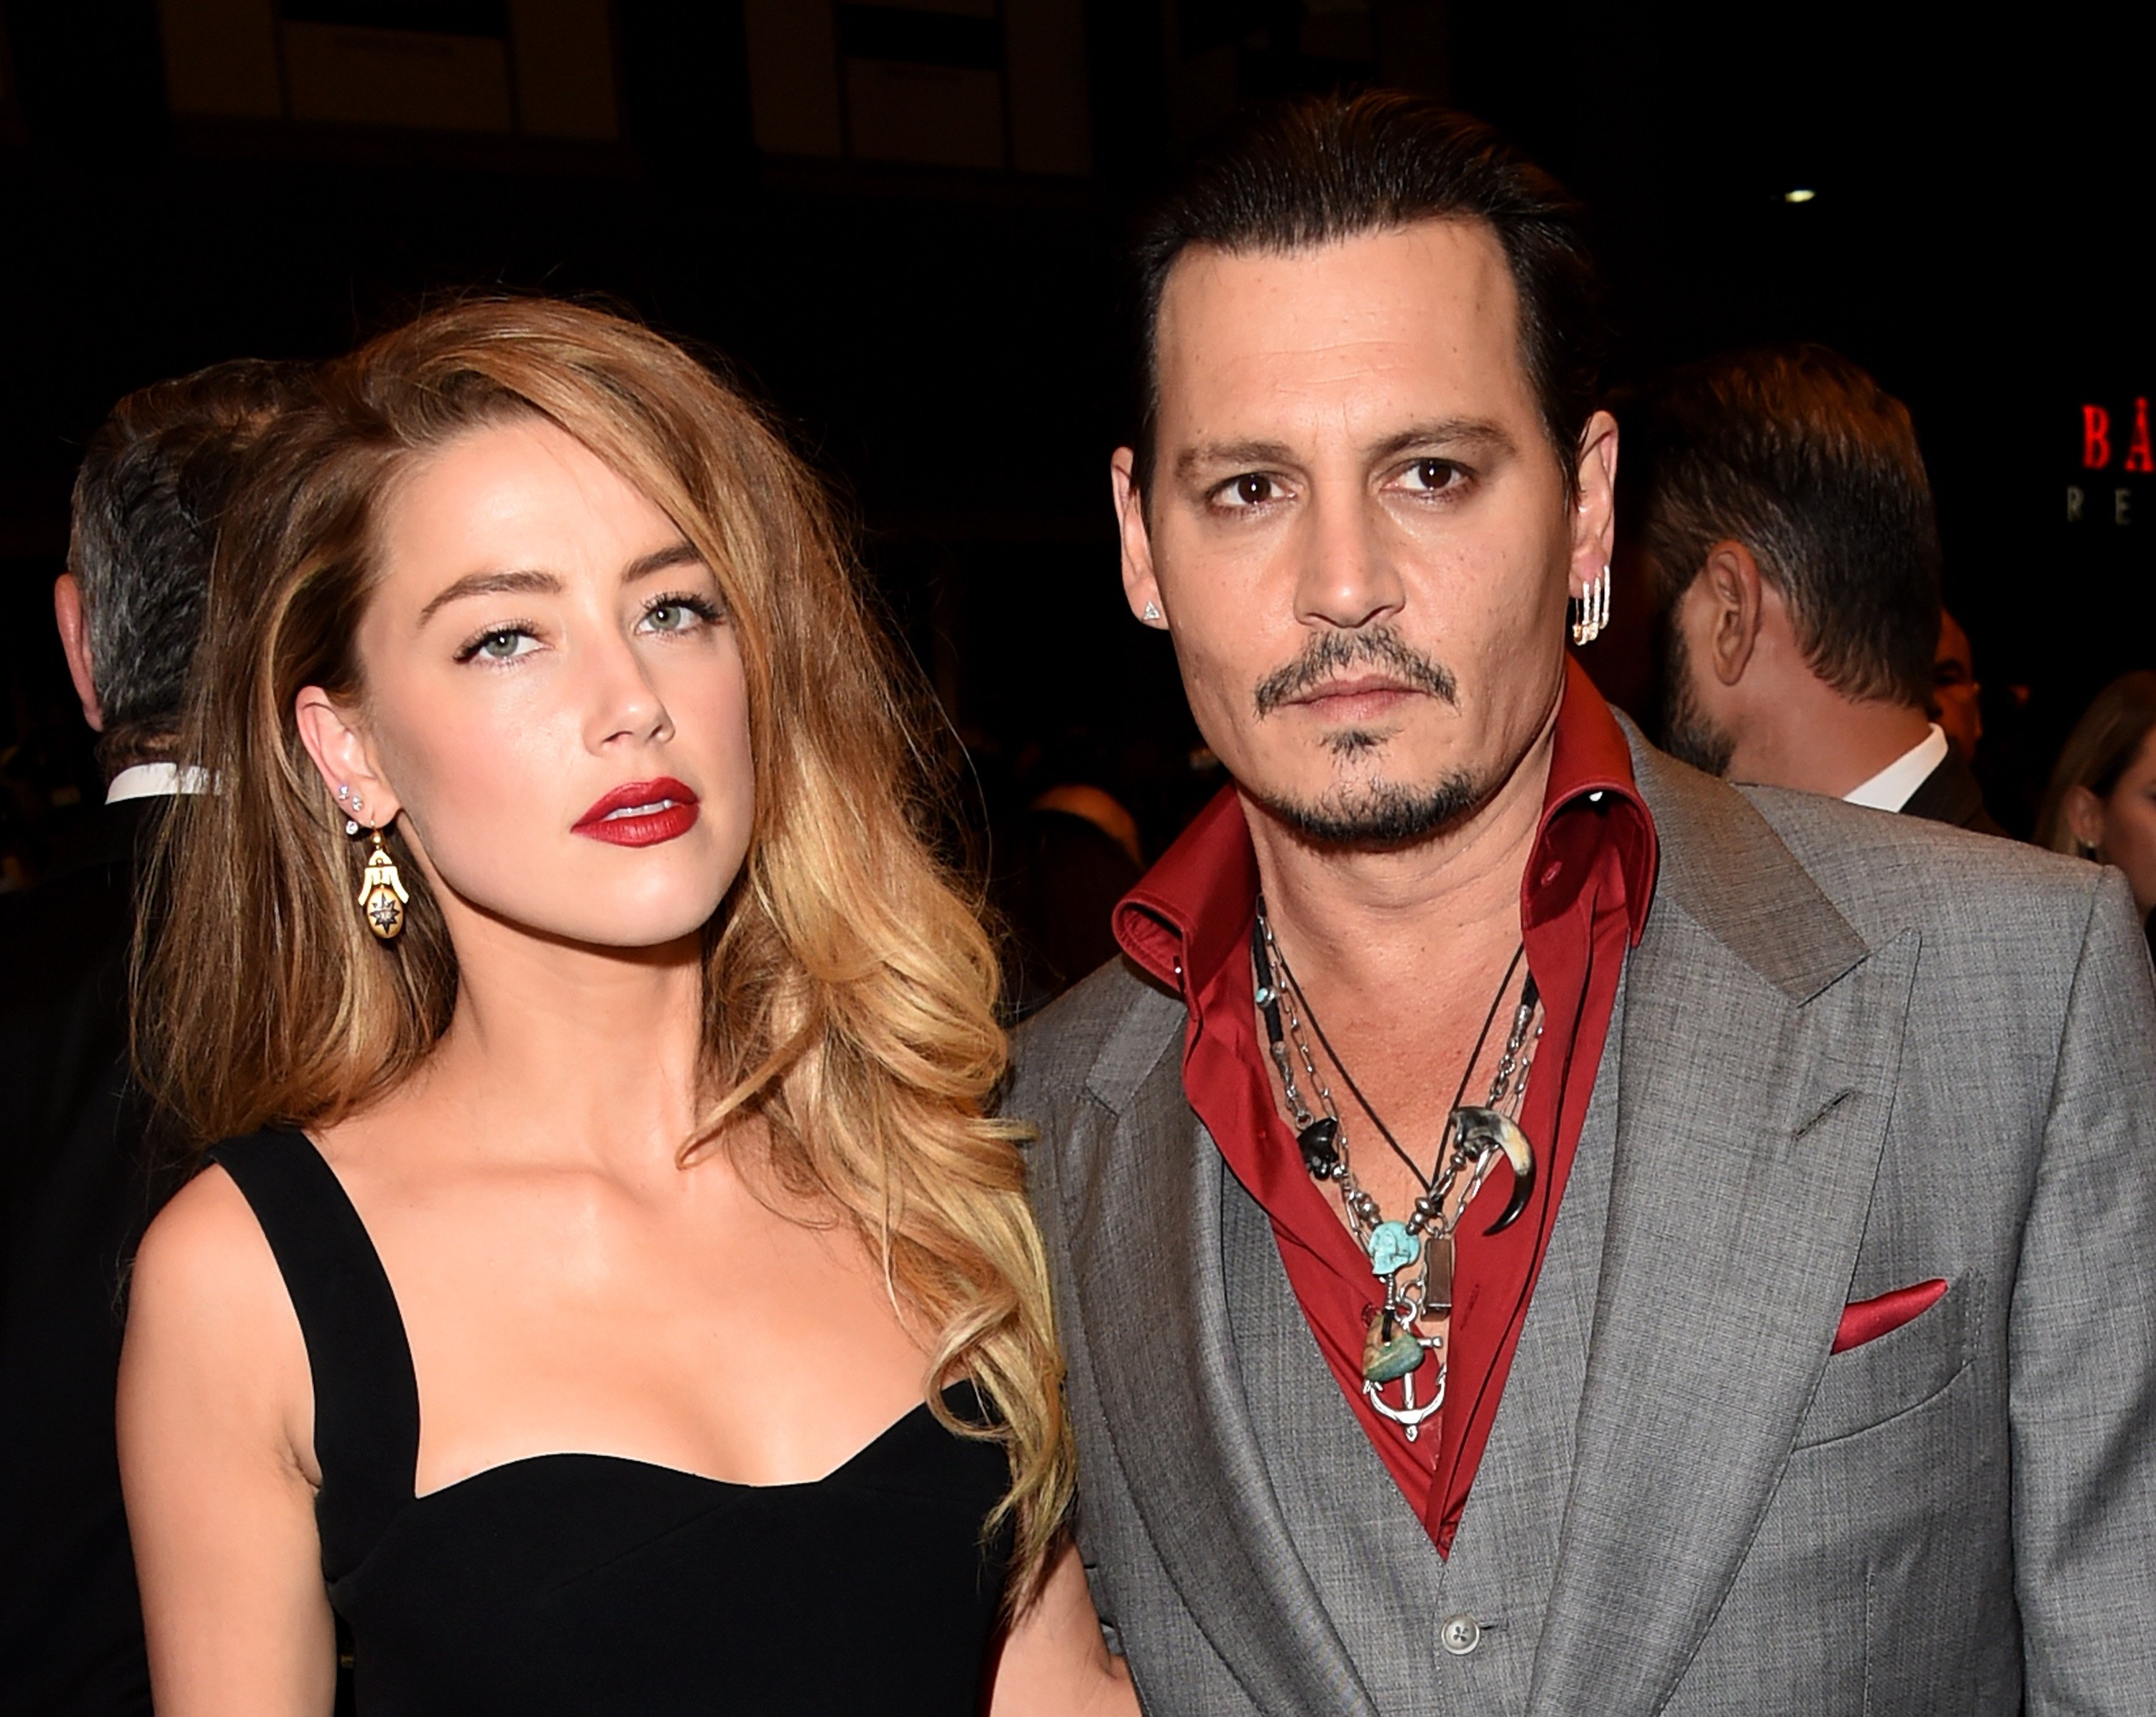 Amber Heard and Johnny Depp attend the "Black Mass" premiere during the 2015 Toronto International Film Festival at The Elgin on September 14, 2015 in Toronto, Canada. | Source: Getty Images